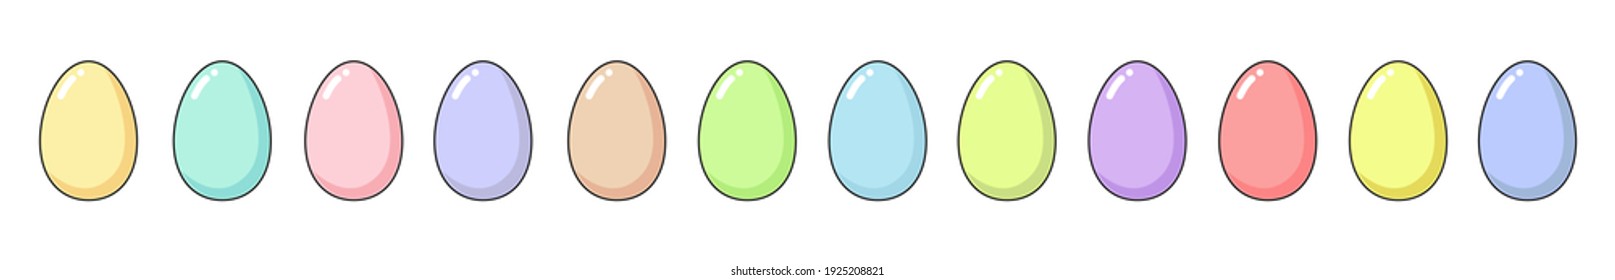 Happy Easter long set with a dozen Easter painted eggs. Fun holiday elements in bright colors - pink, blue, yellow, green, lilac, purple, mint and coral. Square format, vector flat illustration